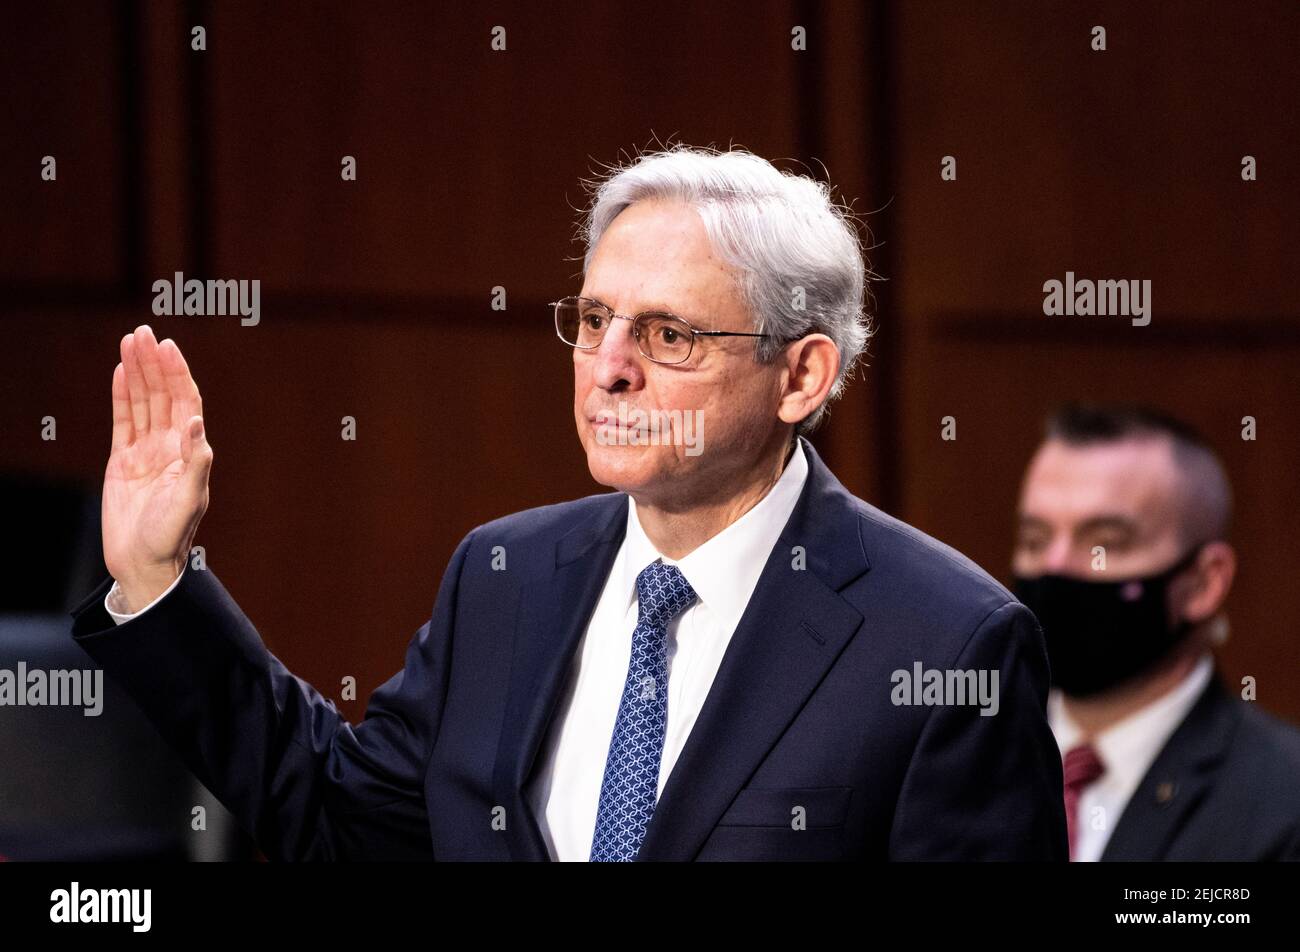 Merrick Garland, nominee to be Attorney General, is sworn in for his confirmation hearing in the Senate Judicary Committee, Washington, DC, U.S., February 22, 2021.  Bill Clark/Pool via REUTERS Stock Photo